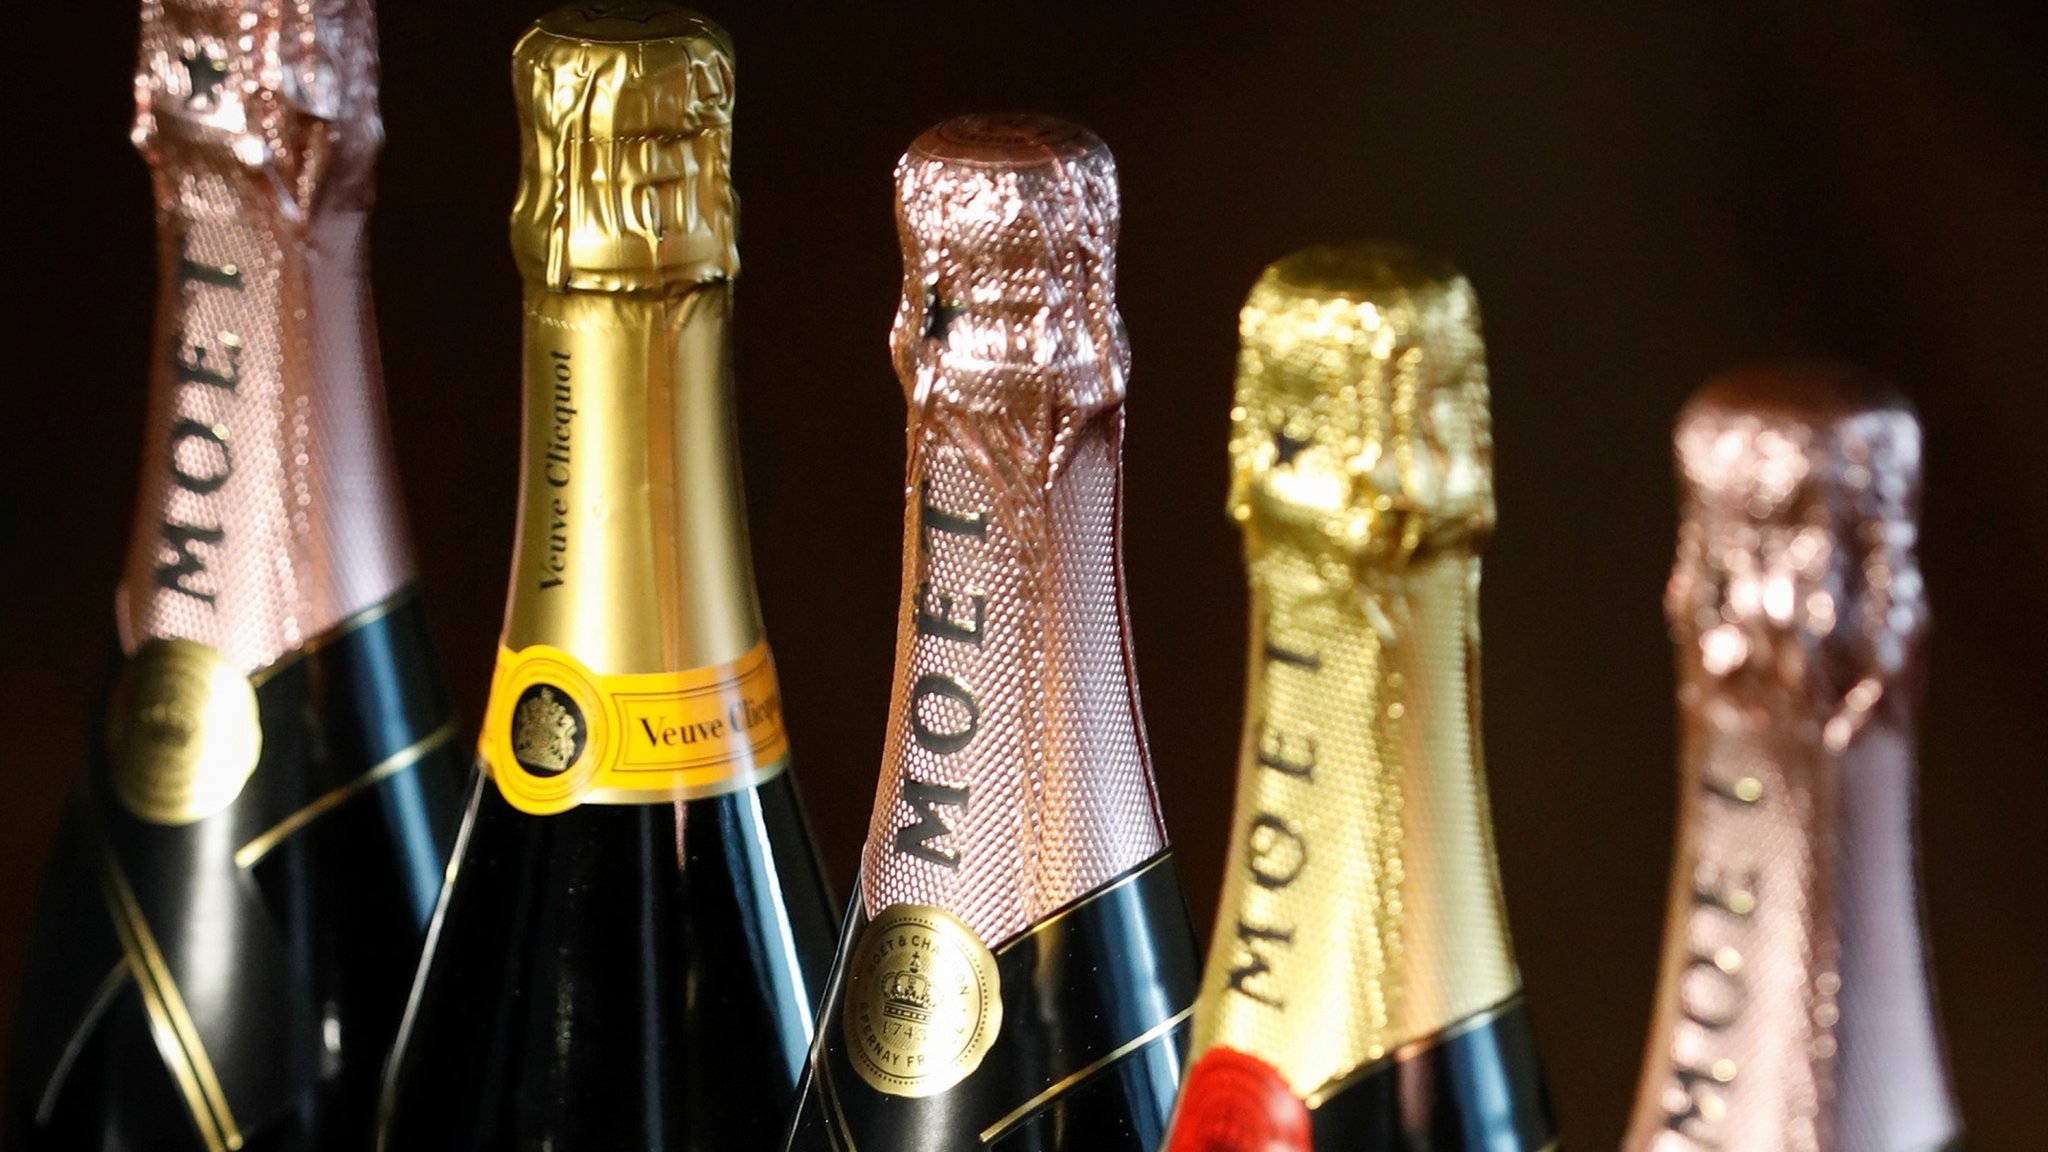 Moet to Label Its Champagne Sparkling Wine in Russia to Meet Law